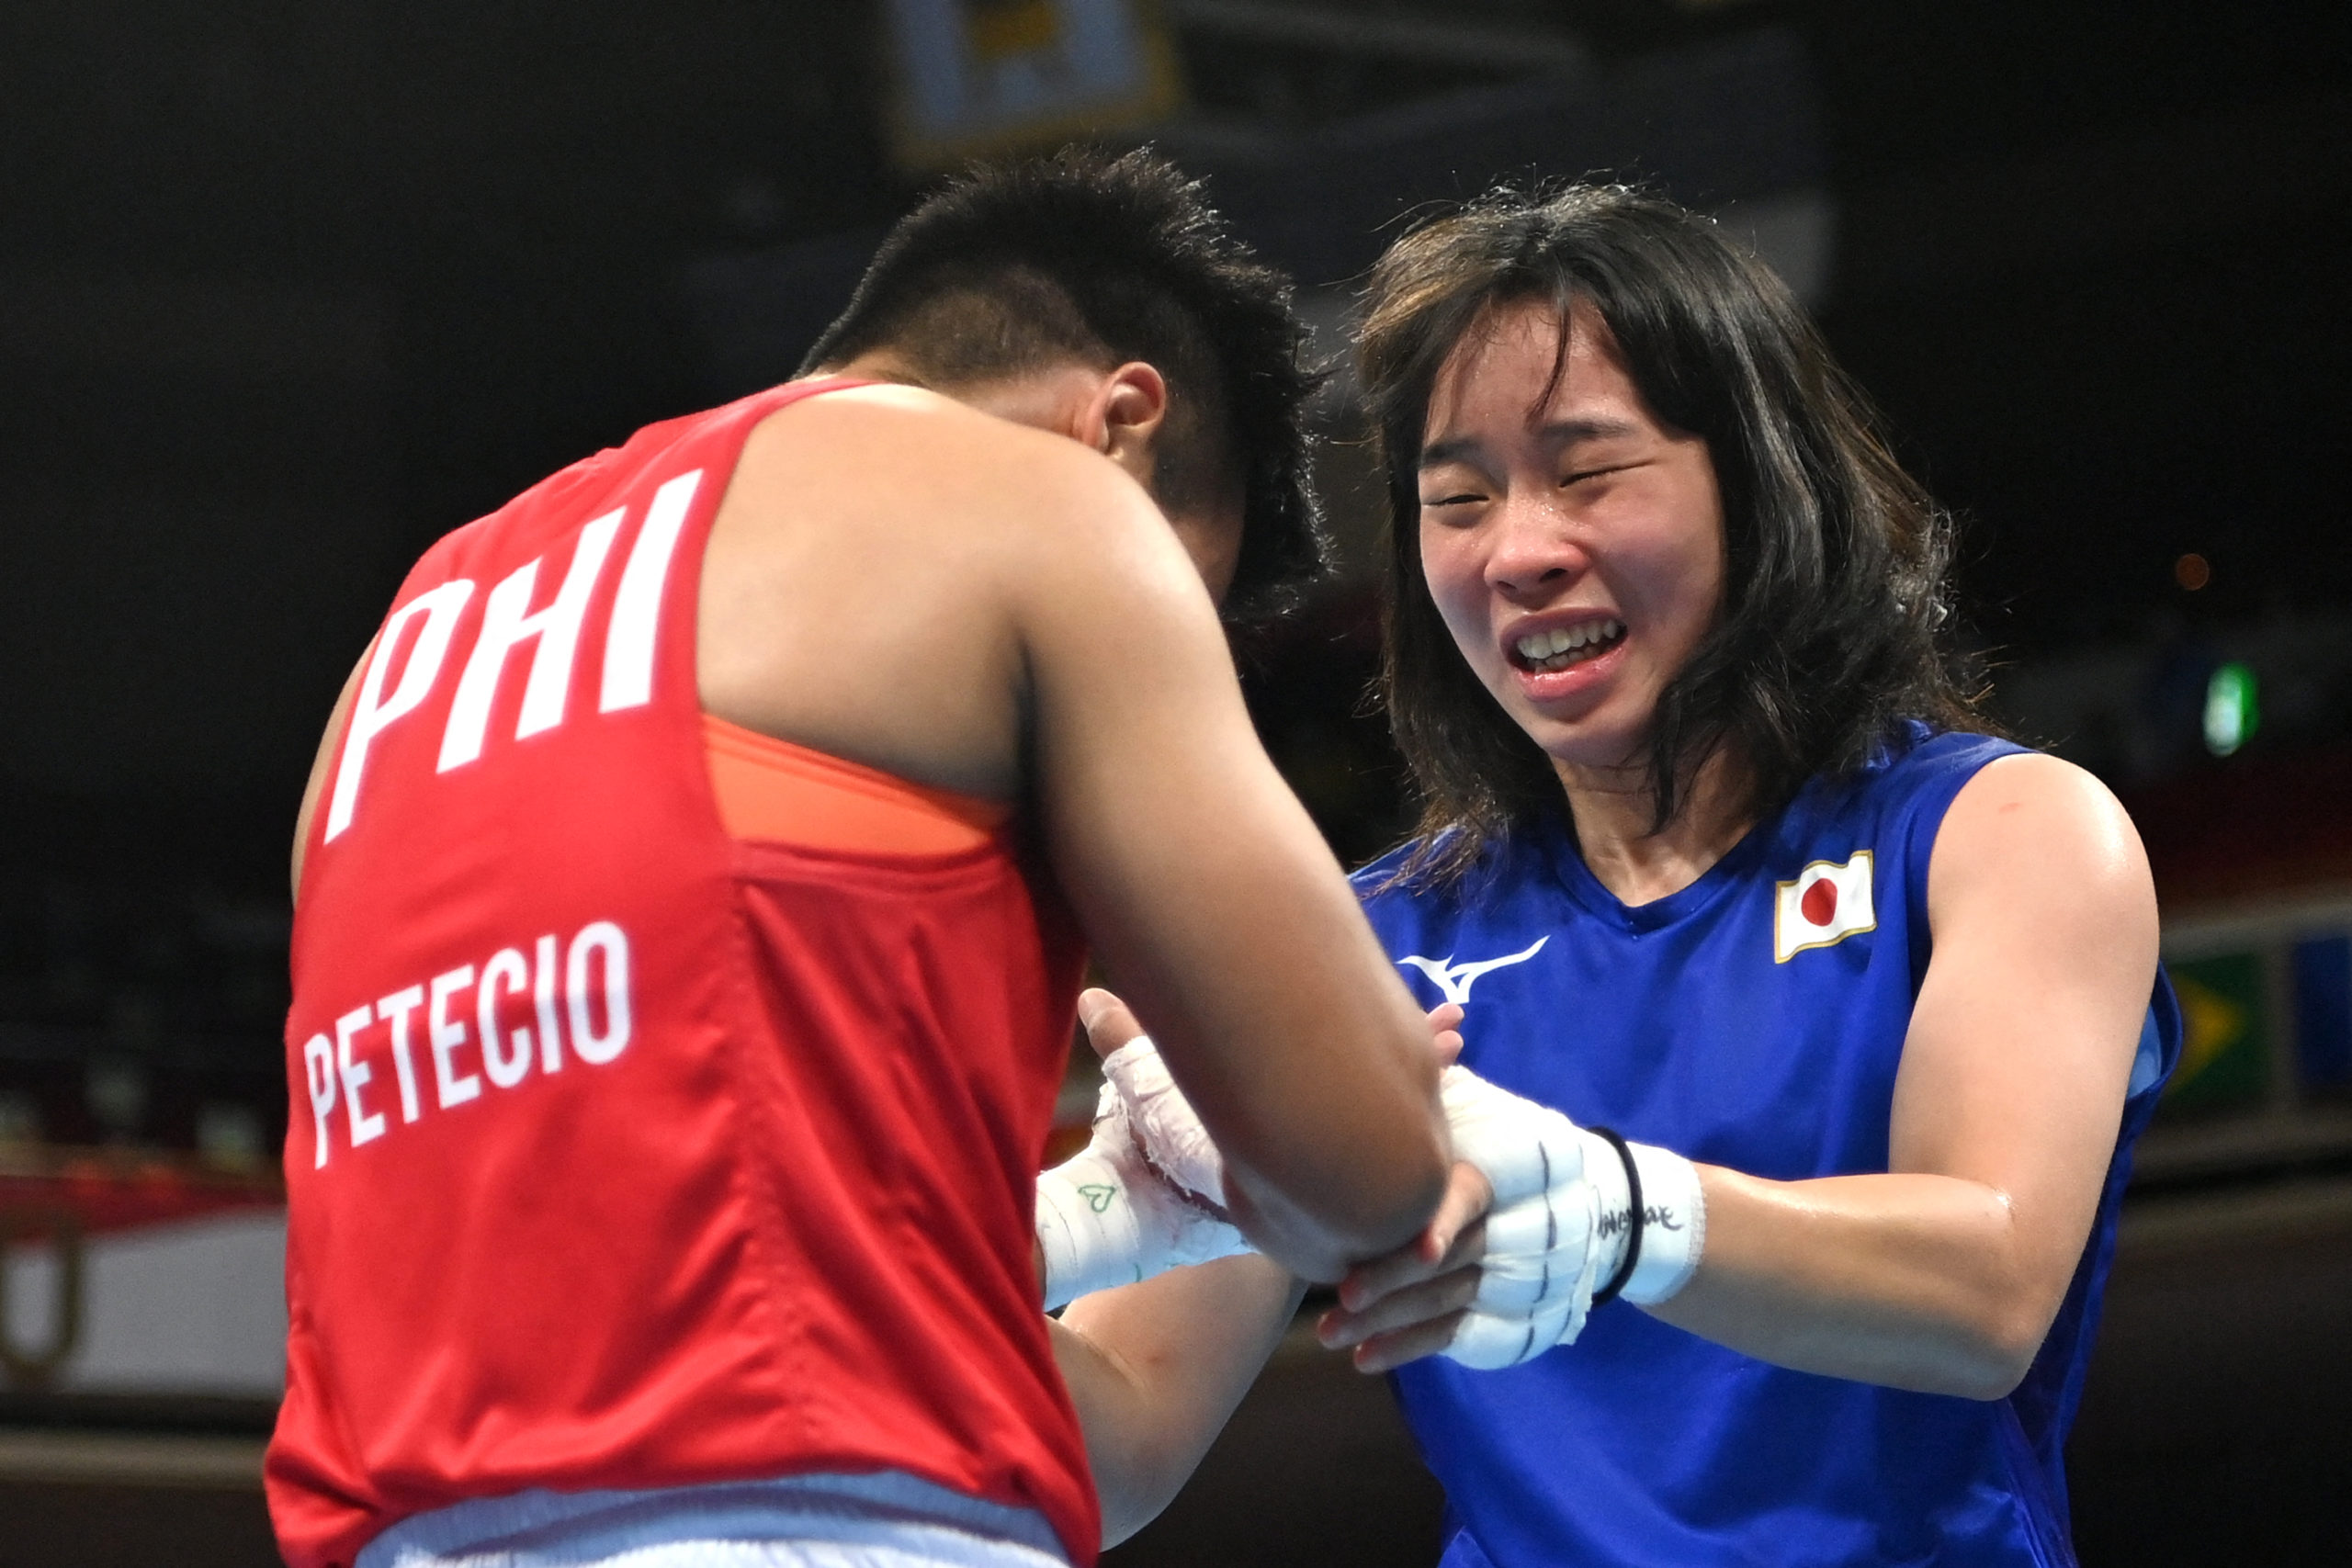 Japan's Sena Irie (blue) celebrates after winning against Philippines' Nesthy Petecio after their women's feather (54-57kg) boxing final bout during the Tokyo 2020 Olympic Games at the Kokugikan Arena in Tokyo on August 3, 2021. 